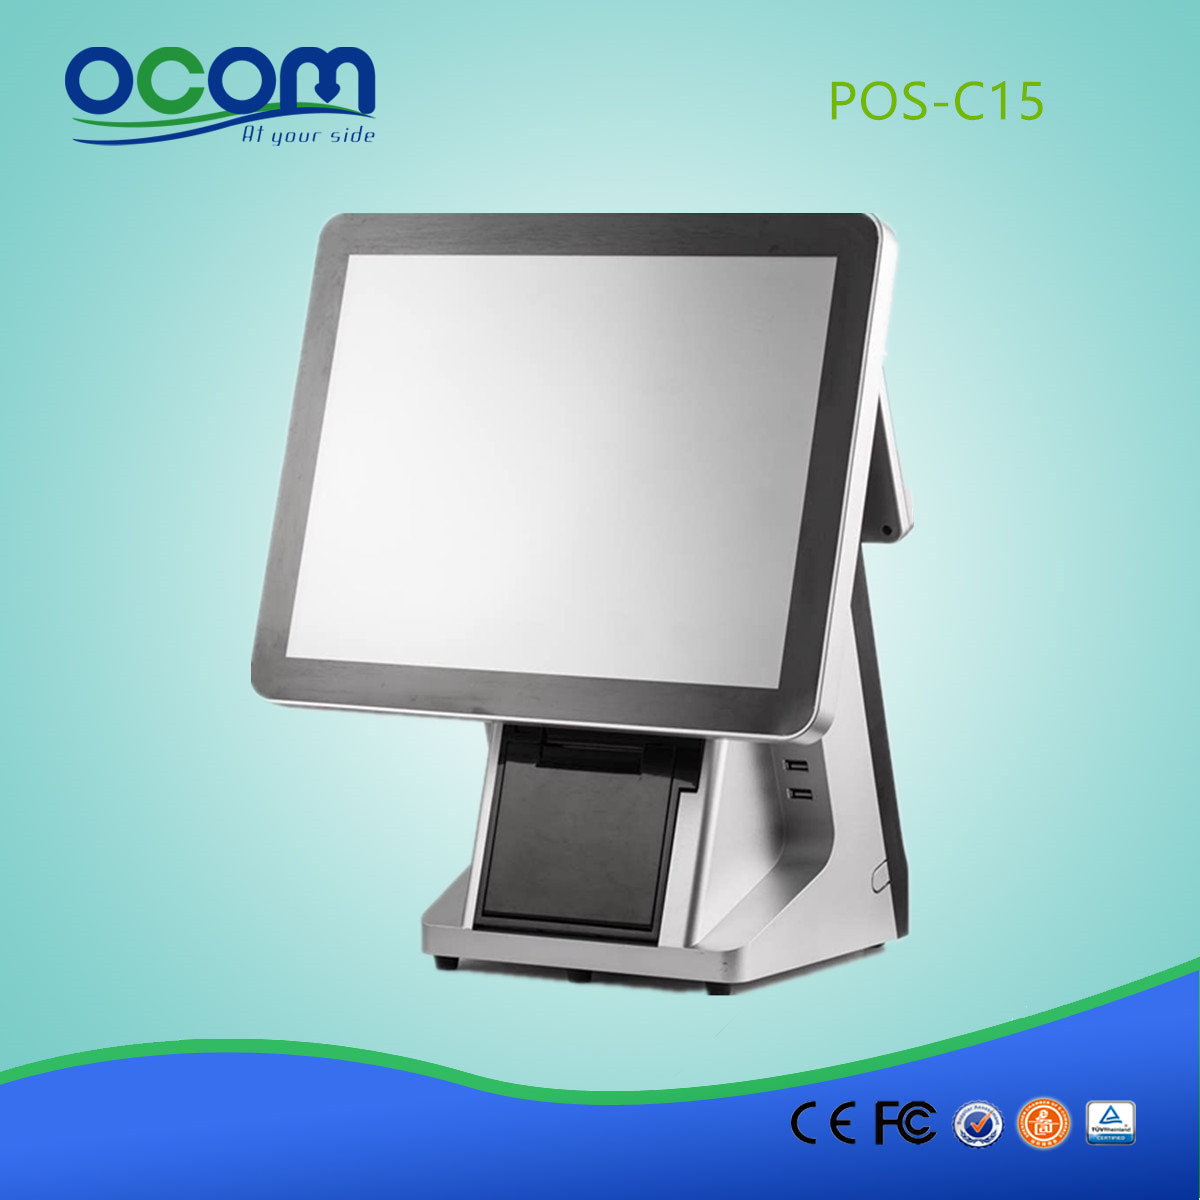 POS-C15-China factory made  J1900 32G SSD all in one 15inch touch pos terminal